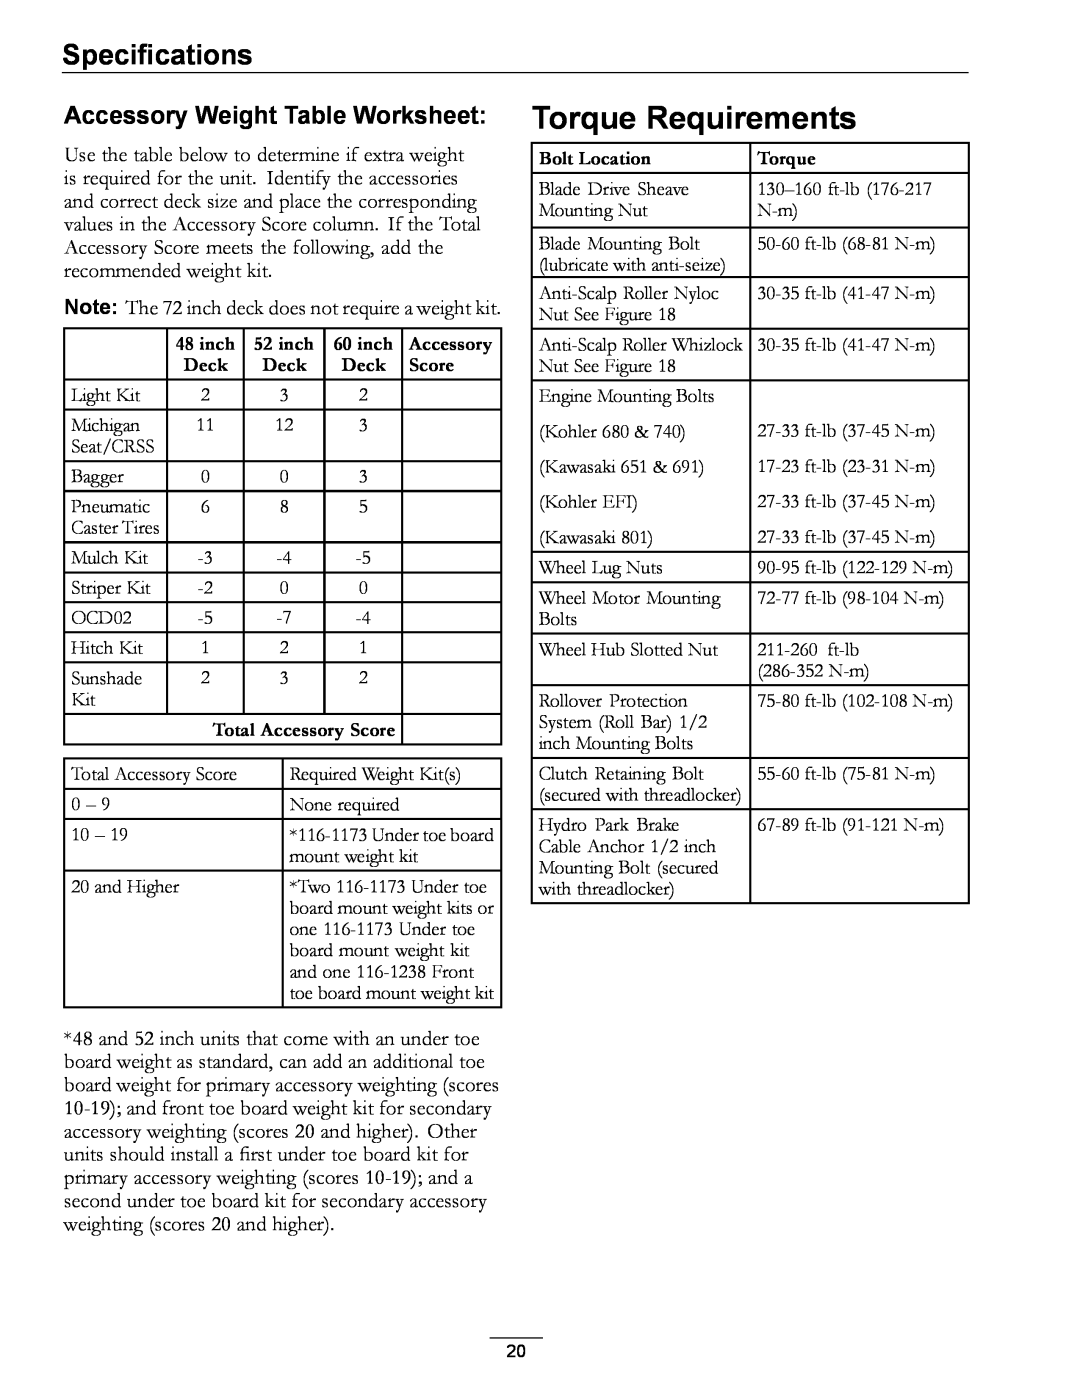 Exmark 000 & higher, 312 manual Torque Requirements, Accessory Weight Table Worksheet, Specifications 